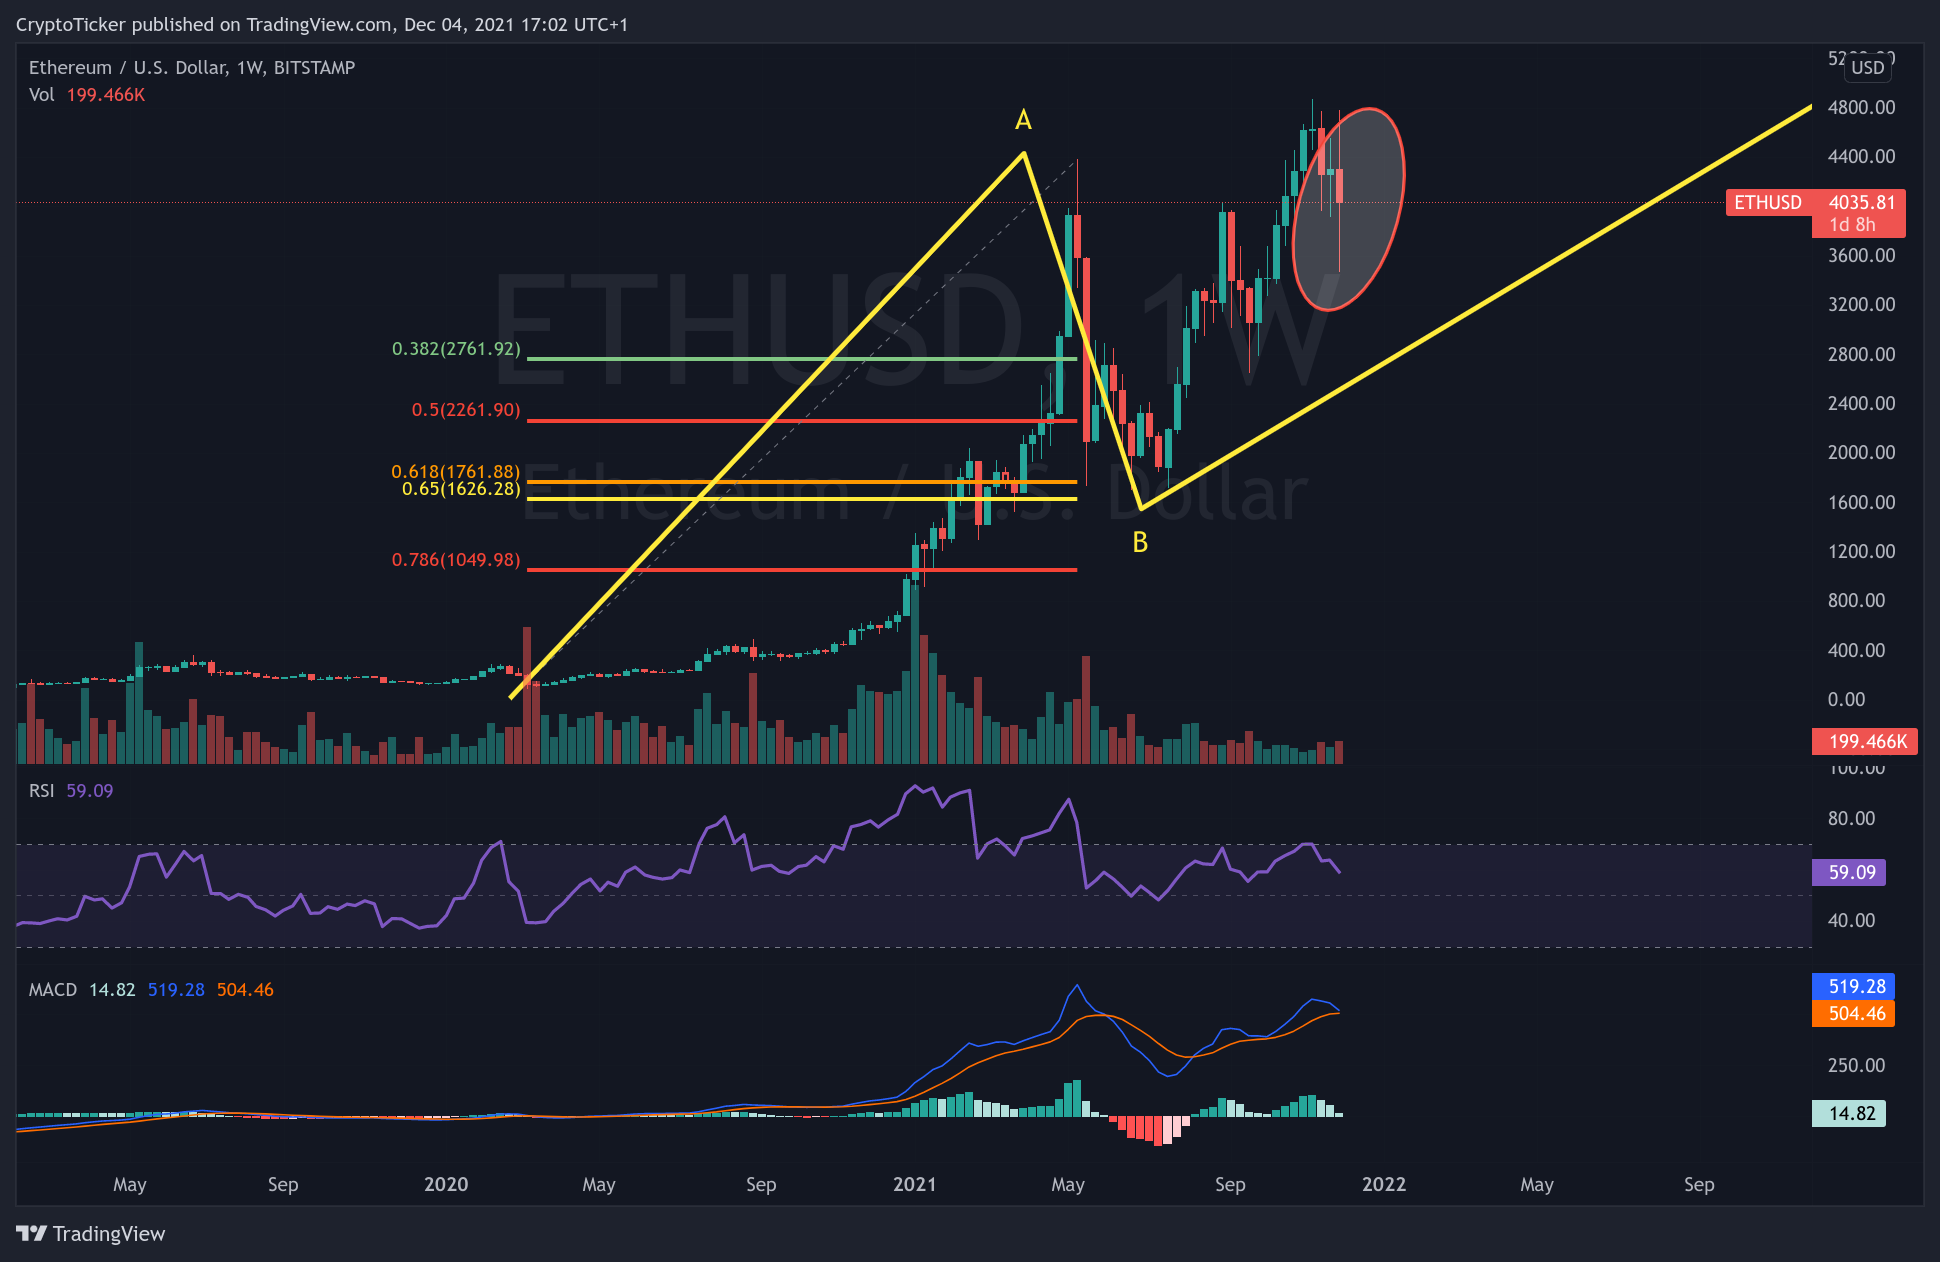 ETH/USD 1-week chart showing the zoomed out outlook of ETH